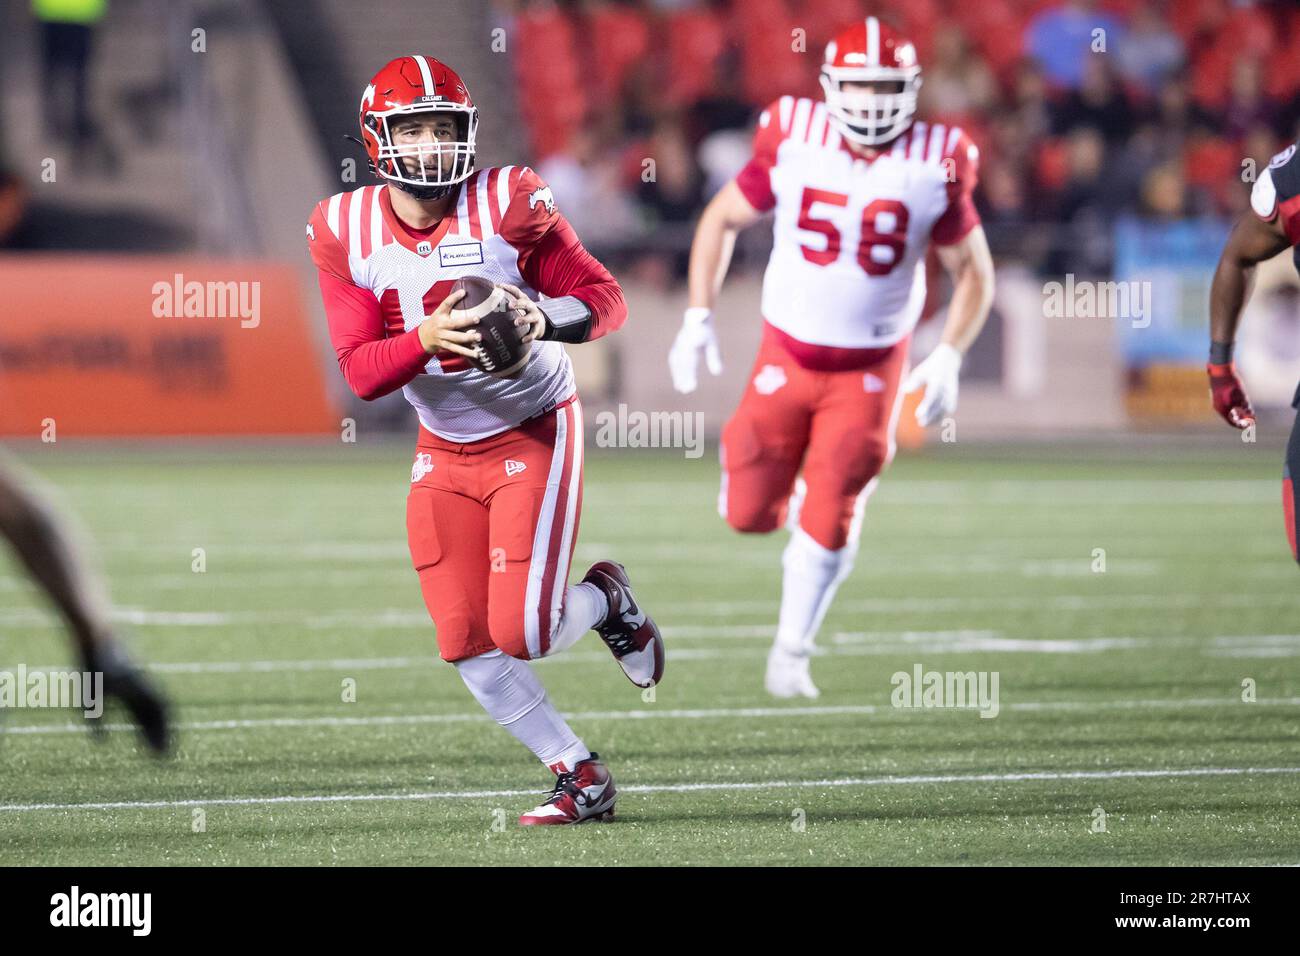 Ottawa, Canada. 15th June, 2023. Calgary Stampeders quarterback Jake Maier (12) runs with the ball during the CFL game between Calgary Stampeders and Ottawa Redblacks held at TD Place Stadium in Ottawa, Canada. Daniel Lea/CSM/Alamy Live News Stock Photo